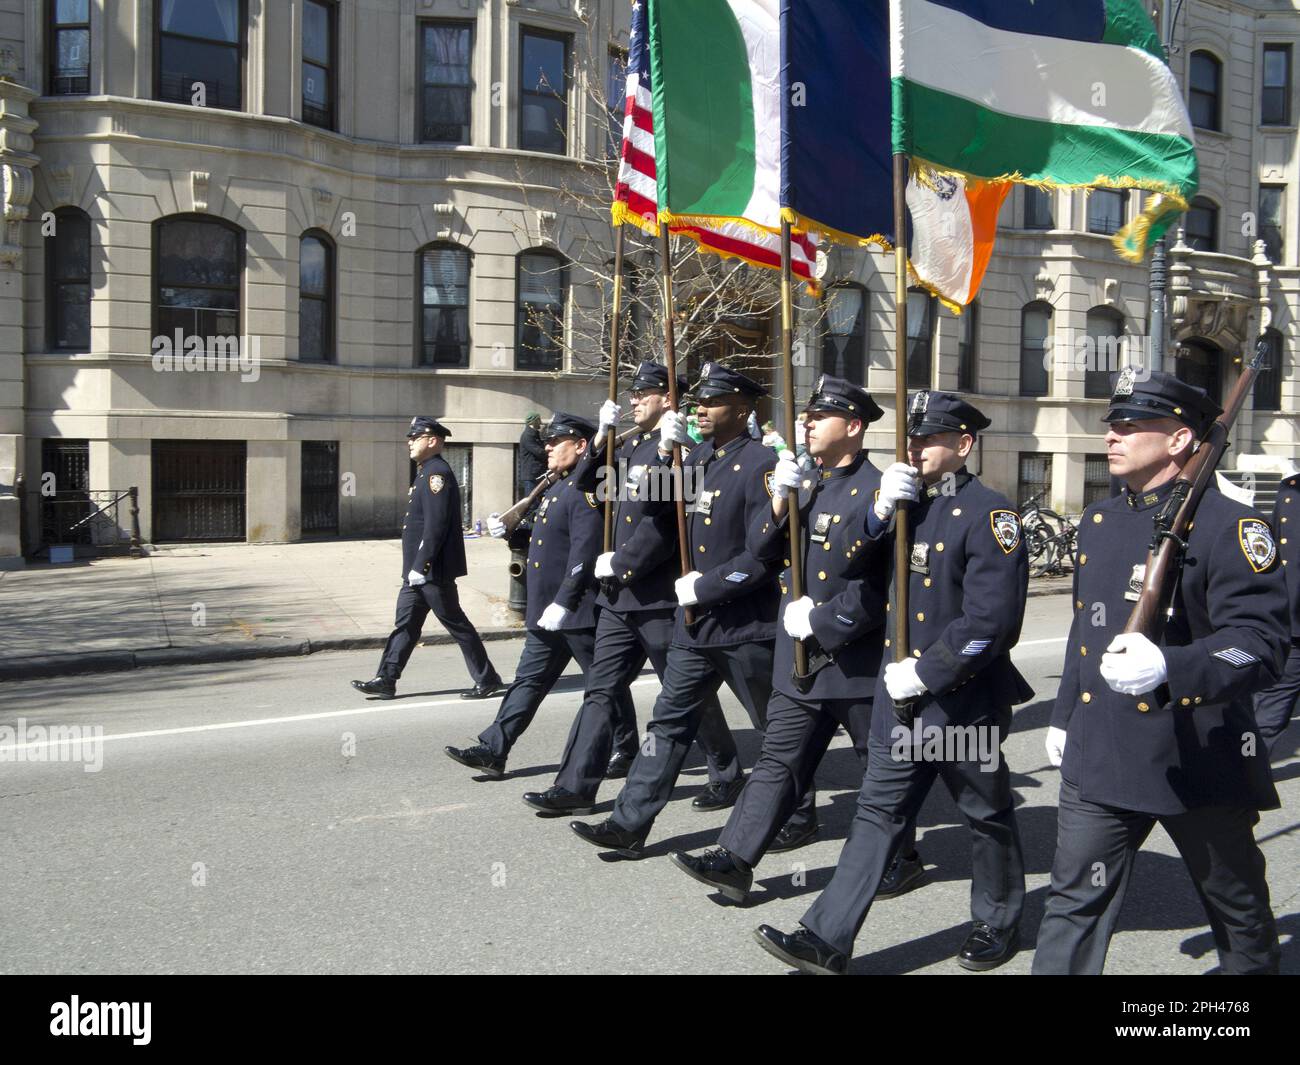 Members of NYPD march in St.Patrick's Day Parade in Park Slope, Brooklyn, NY Stock Photo